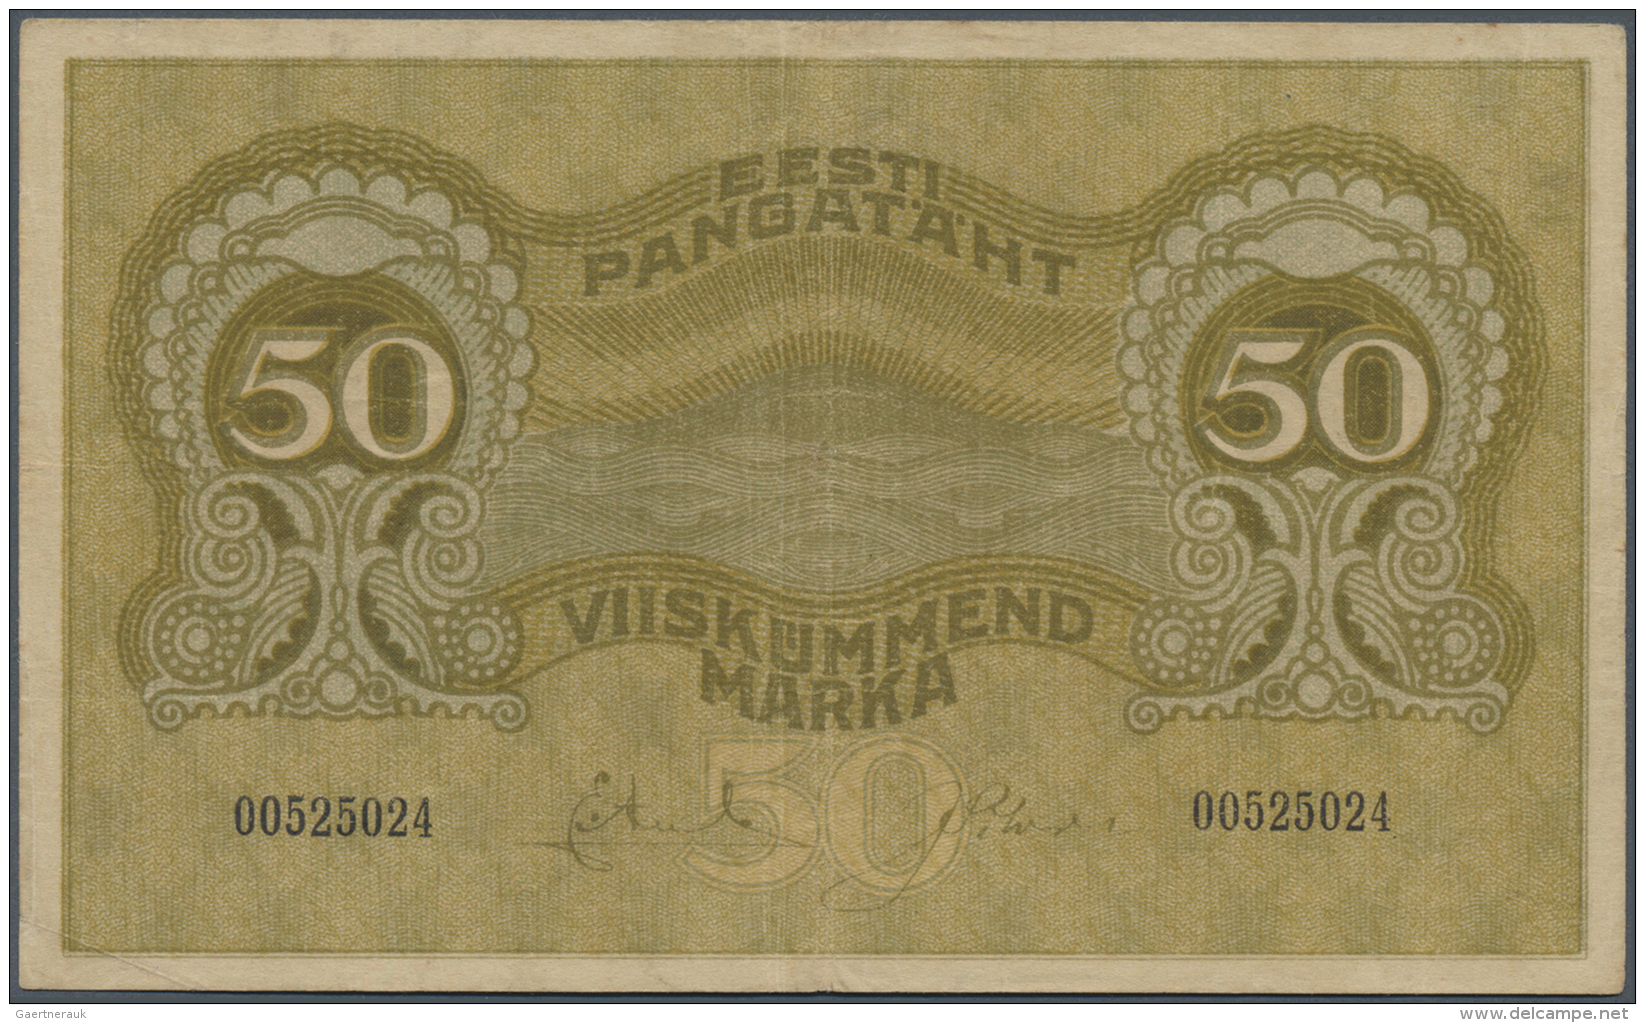 Estonia / Estland: 50 Marka 1919 P. 55, Used With Center Fold And Border Dints, No Holes Or Tears, Still Strongness In P - Estonie